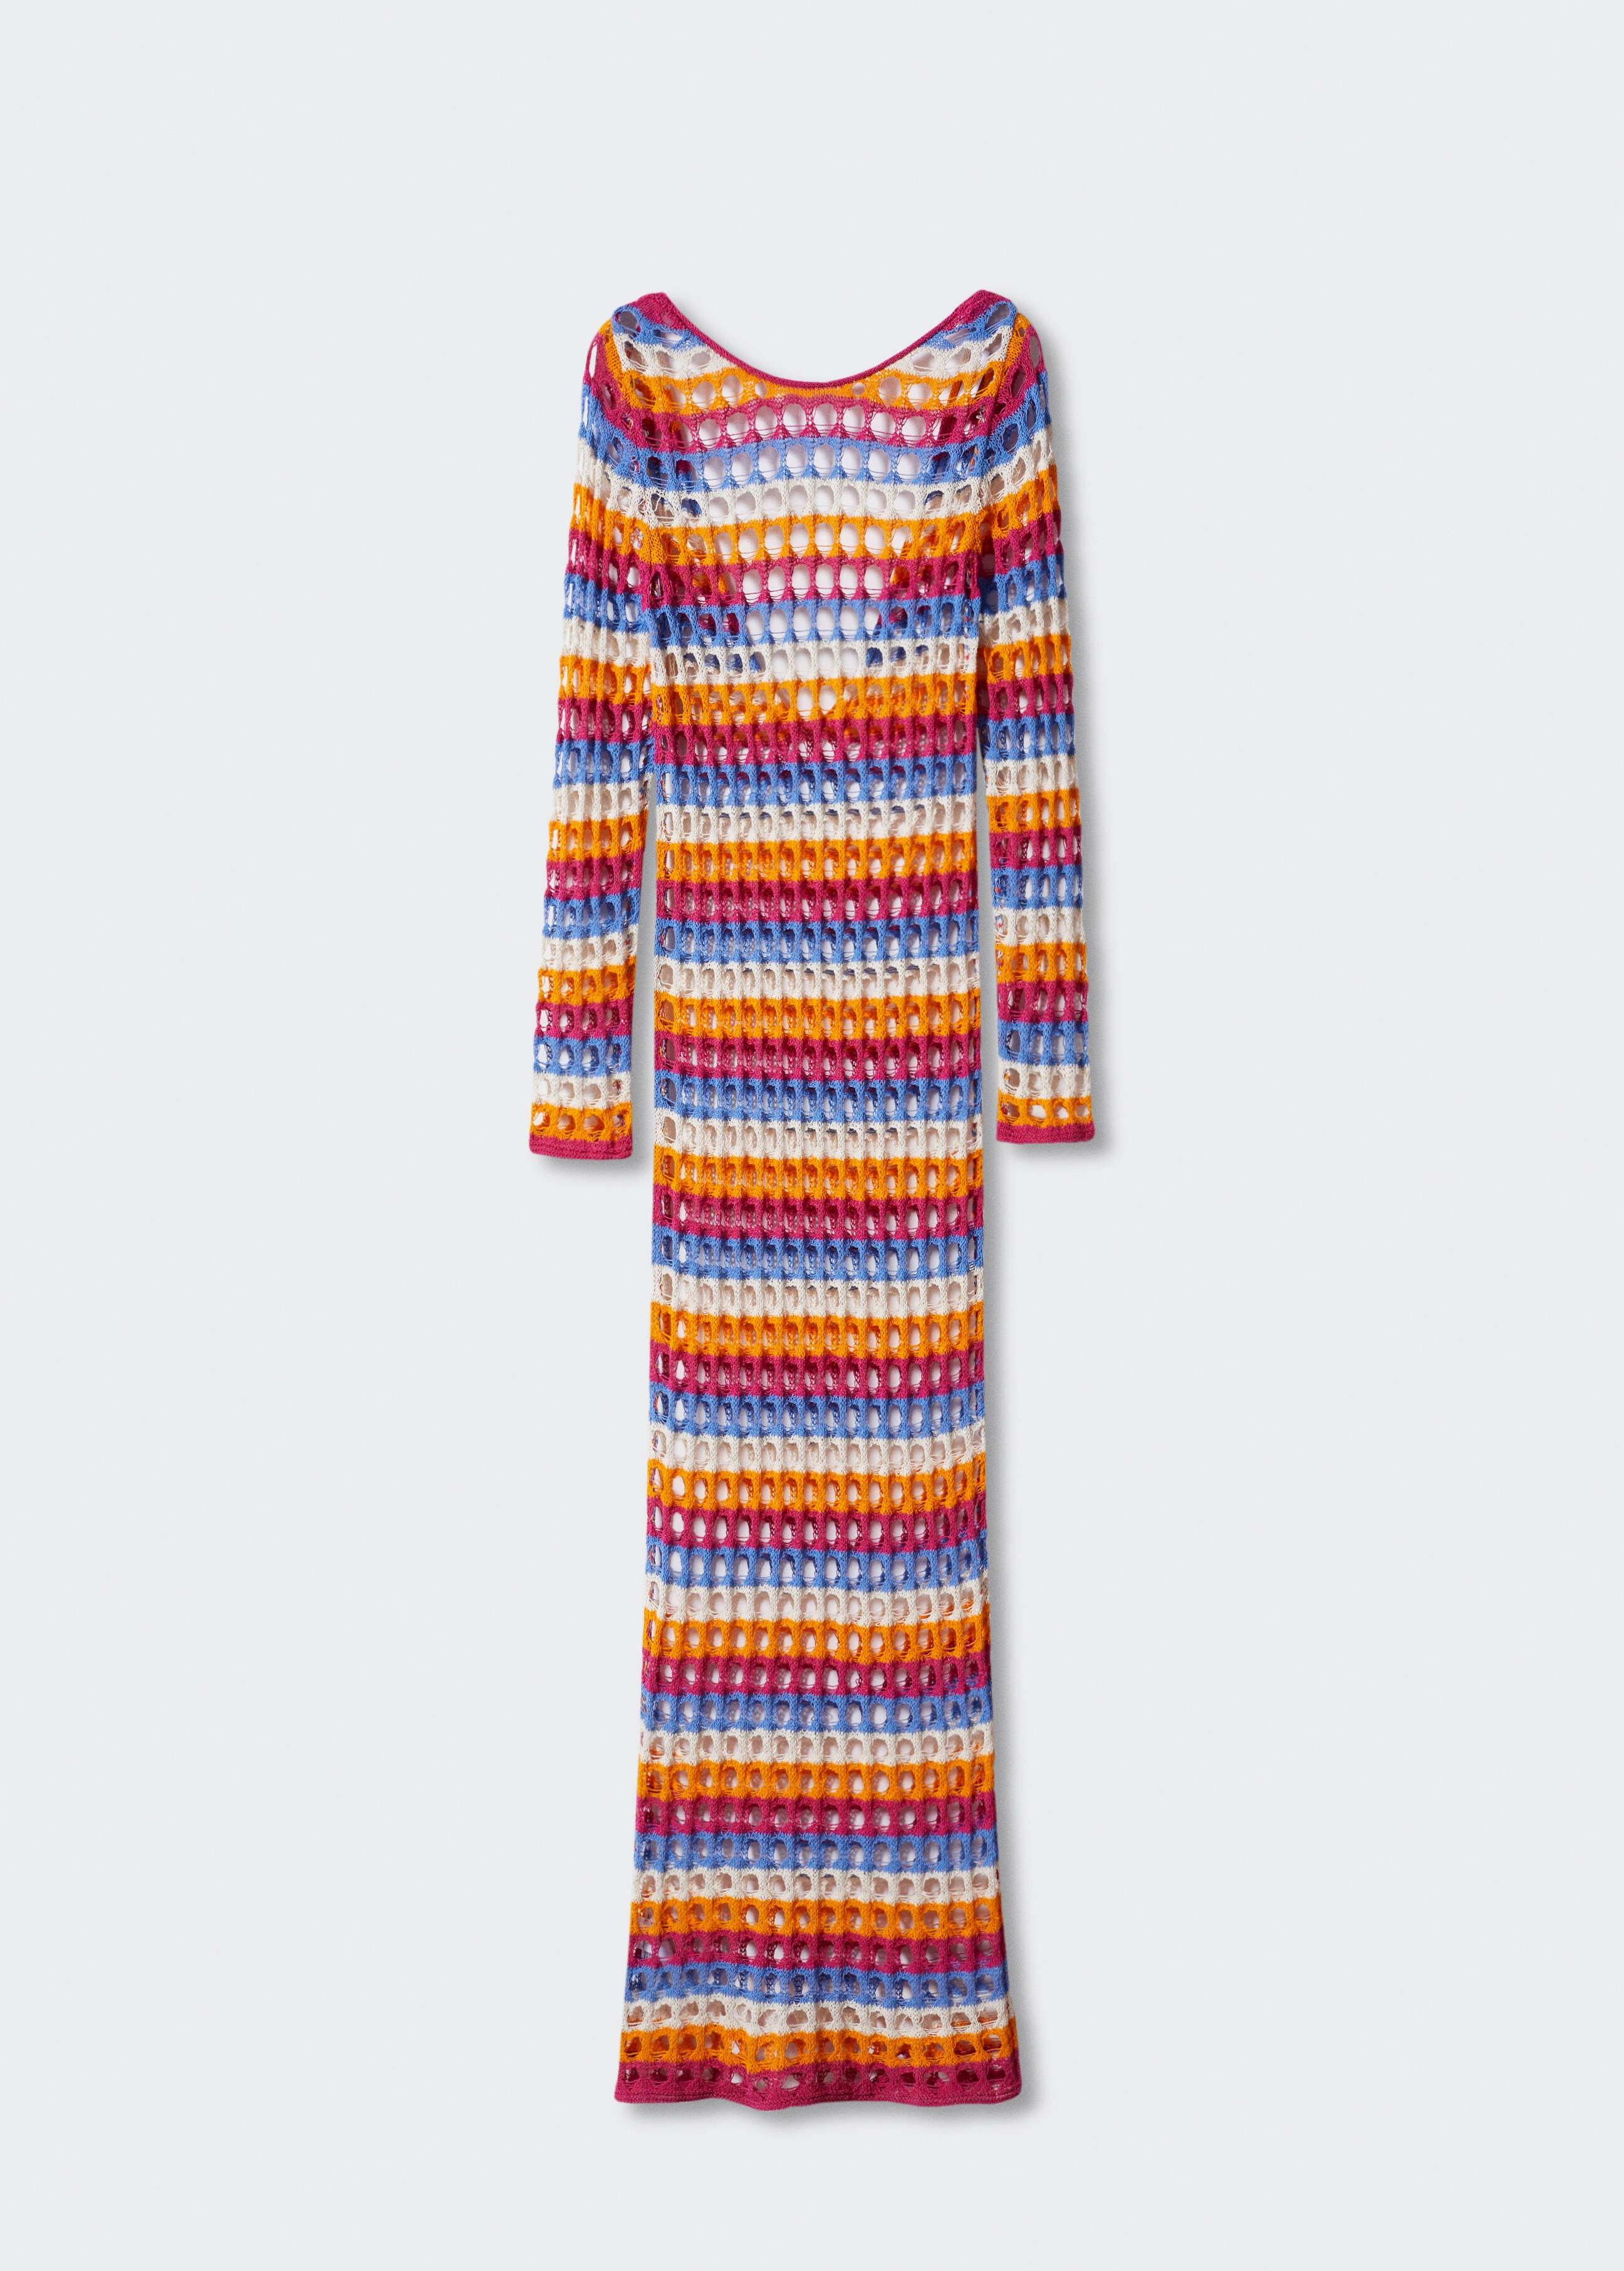 Multi-coloured crochet dress - Article without model